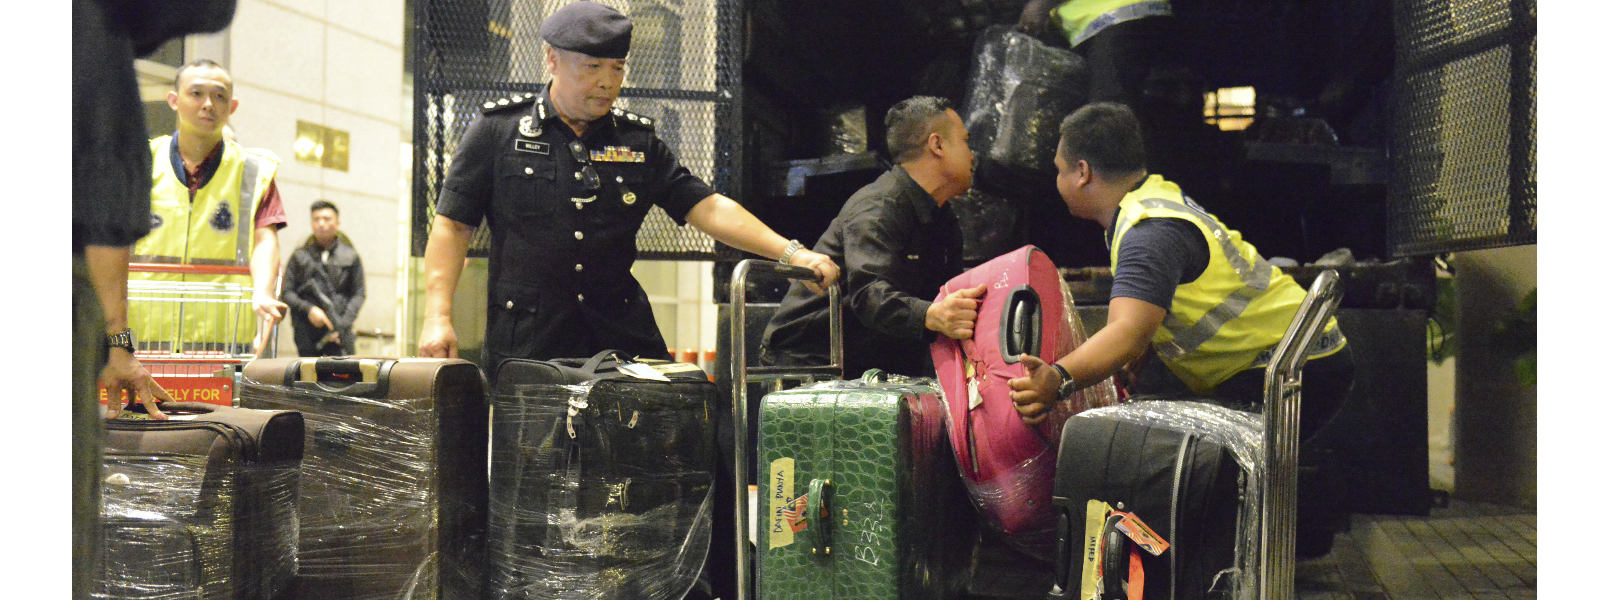 Cash filled suitcases seized from houses linked to former Malaysian PM